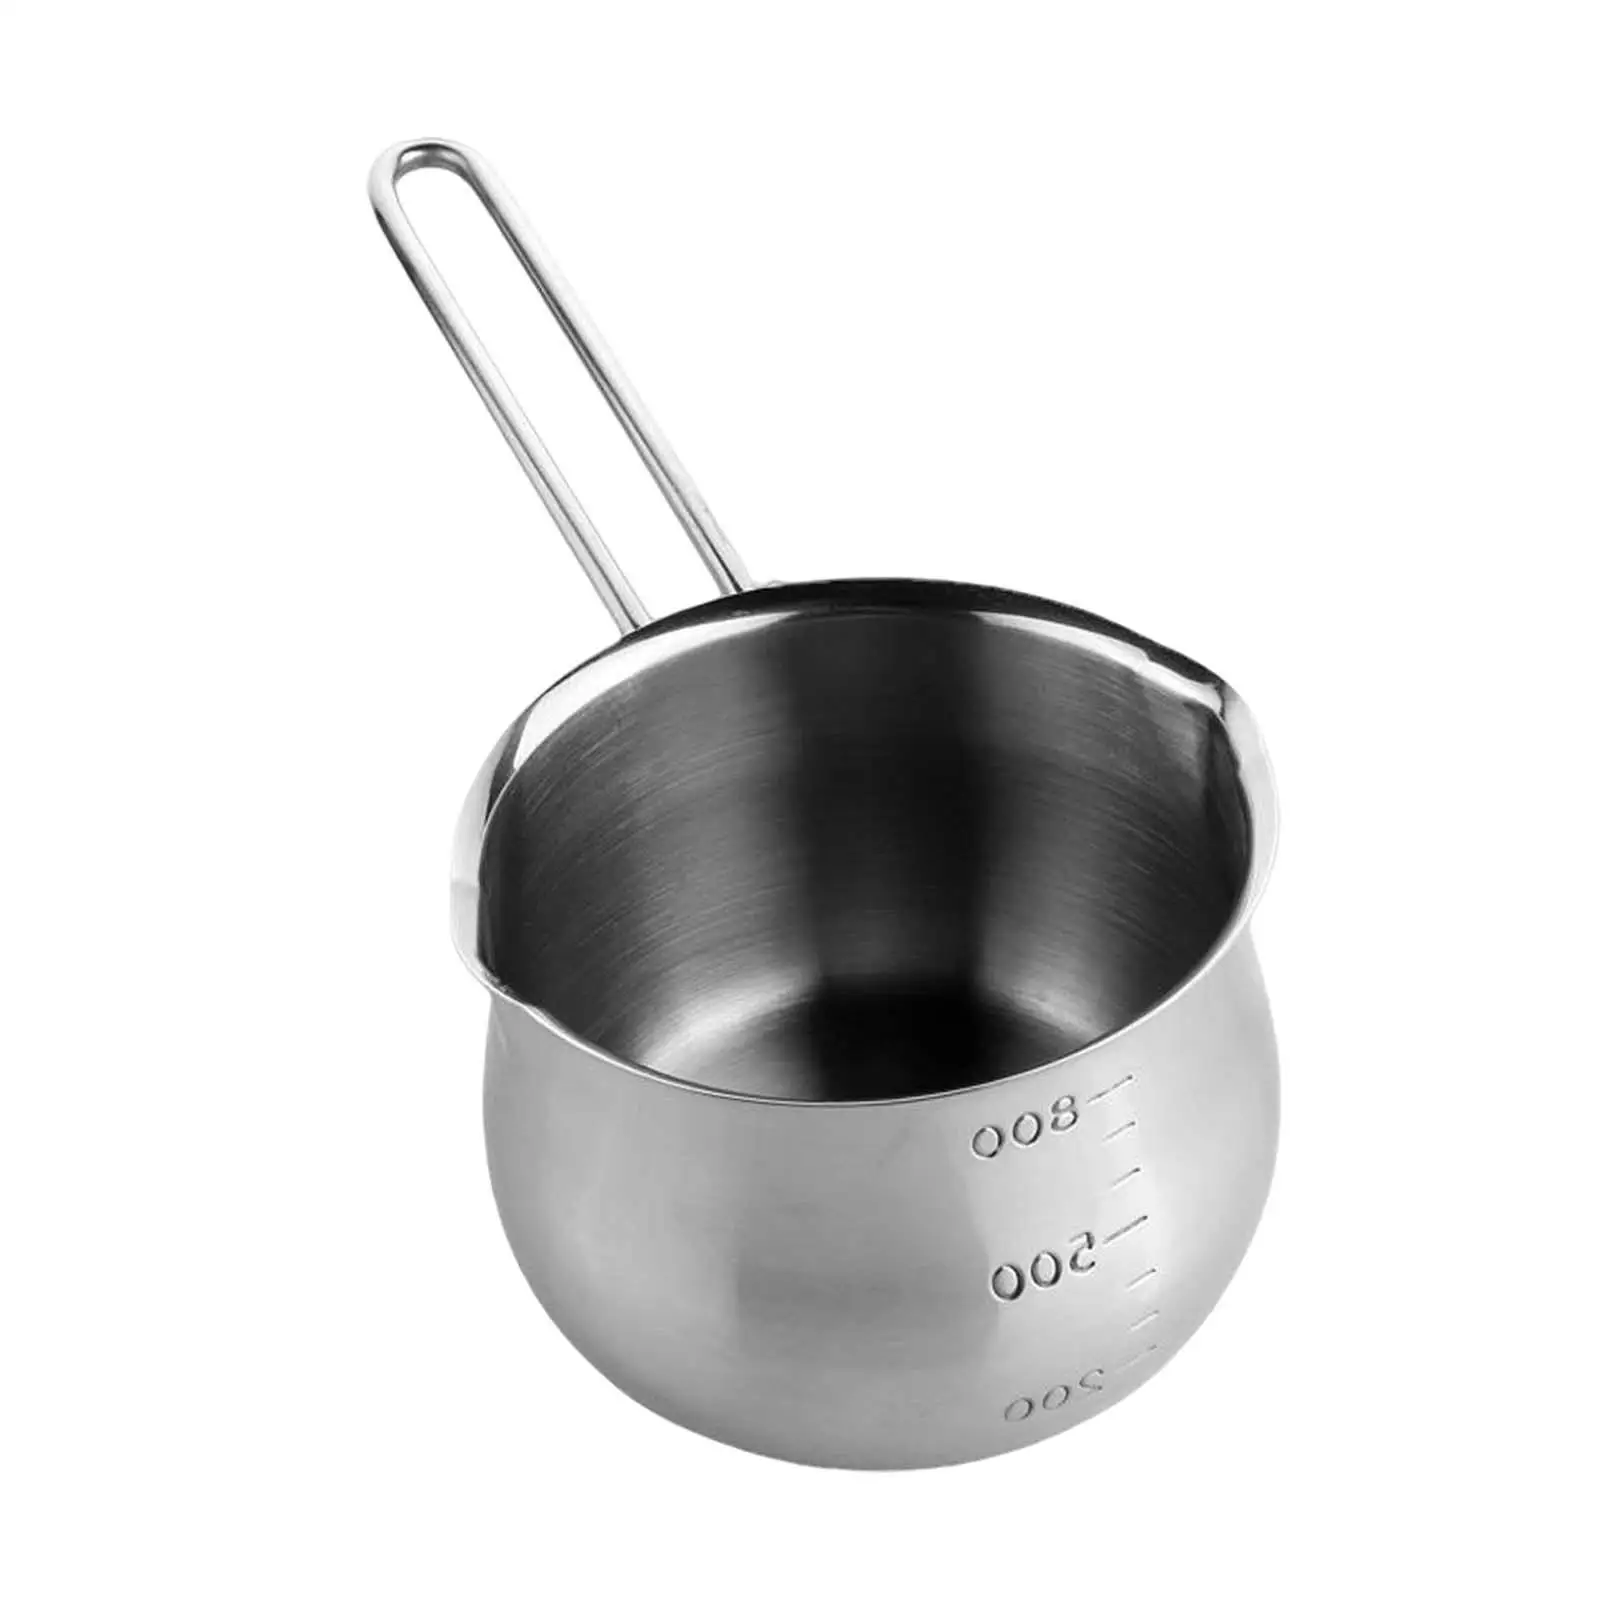 Stainless Steel Small Milk Pot Coffee Pot with Handle Cookware for Camping